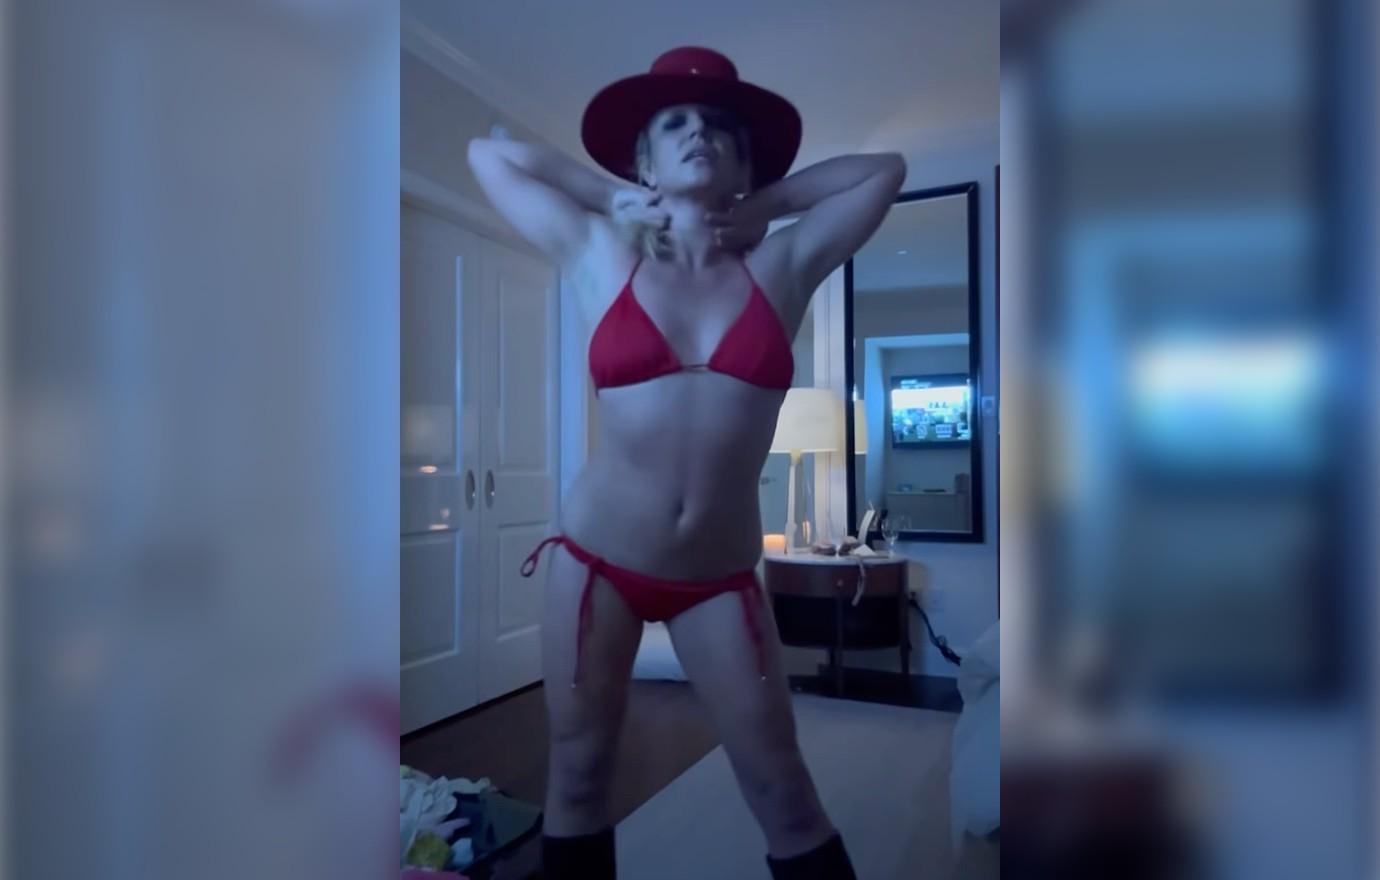 Britney Spears Shows Off Weird Dance Moves In Bizarre Video Watch photo